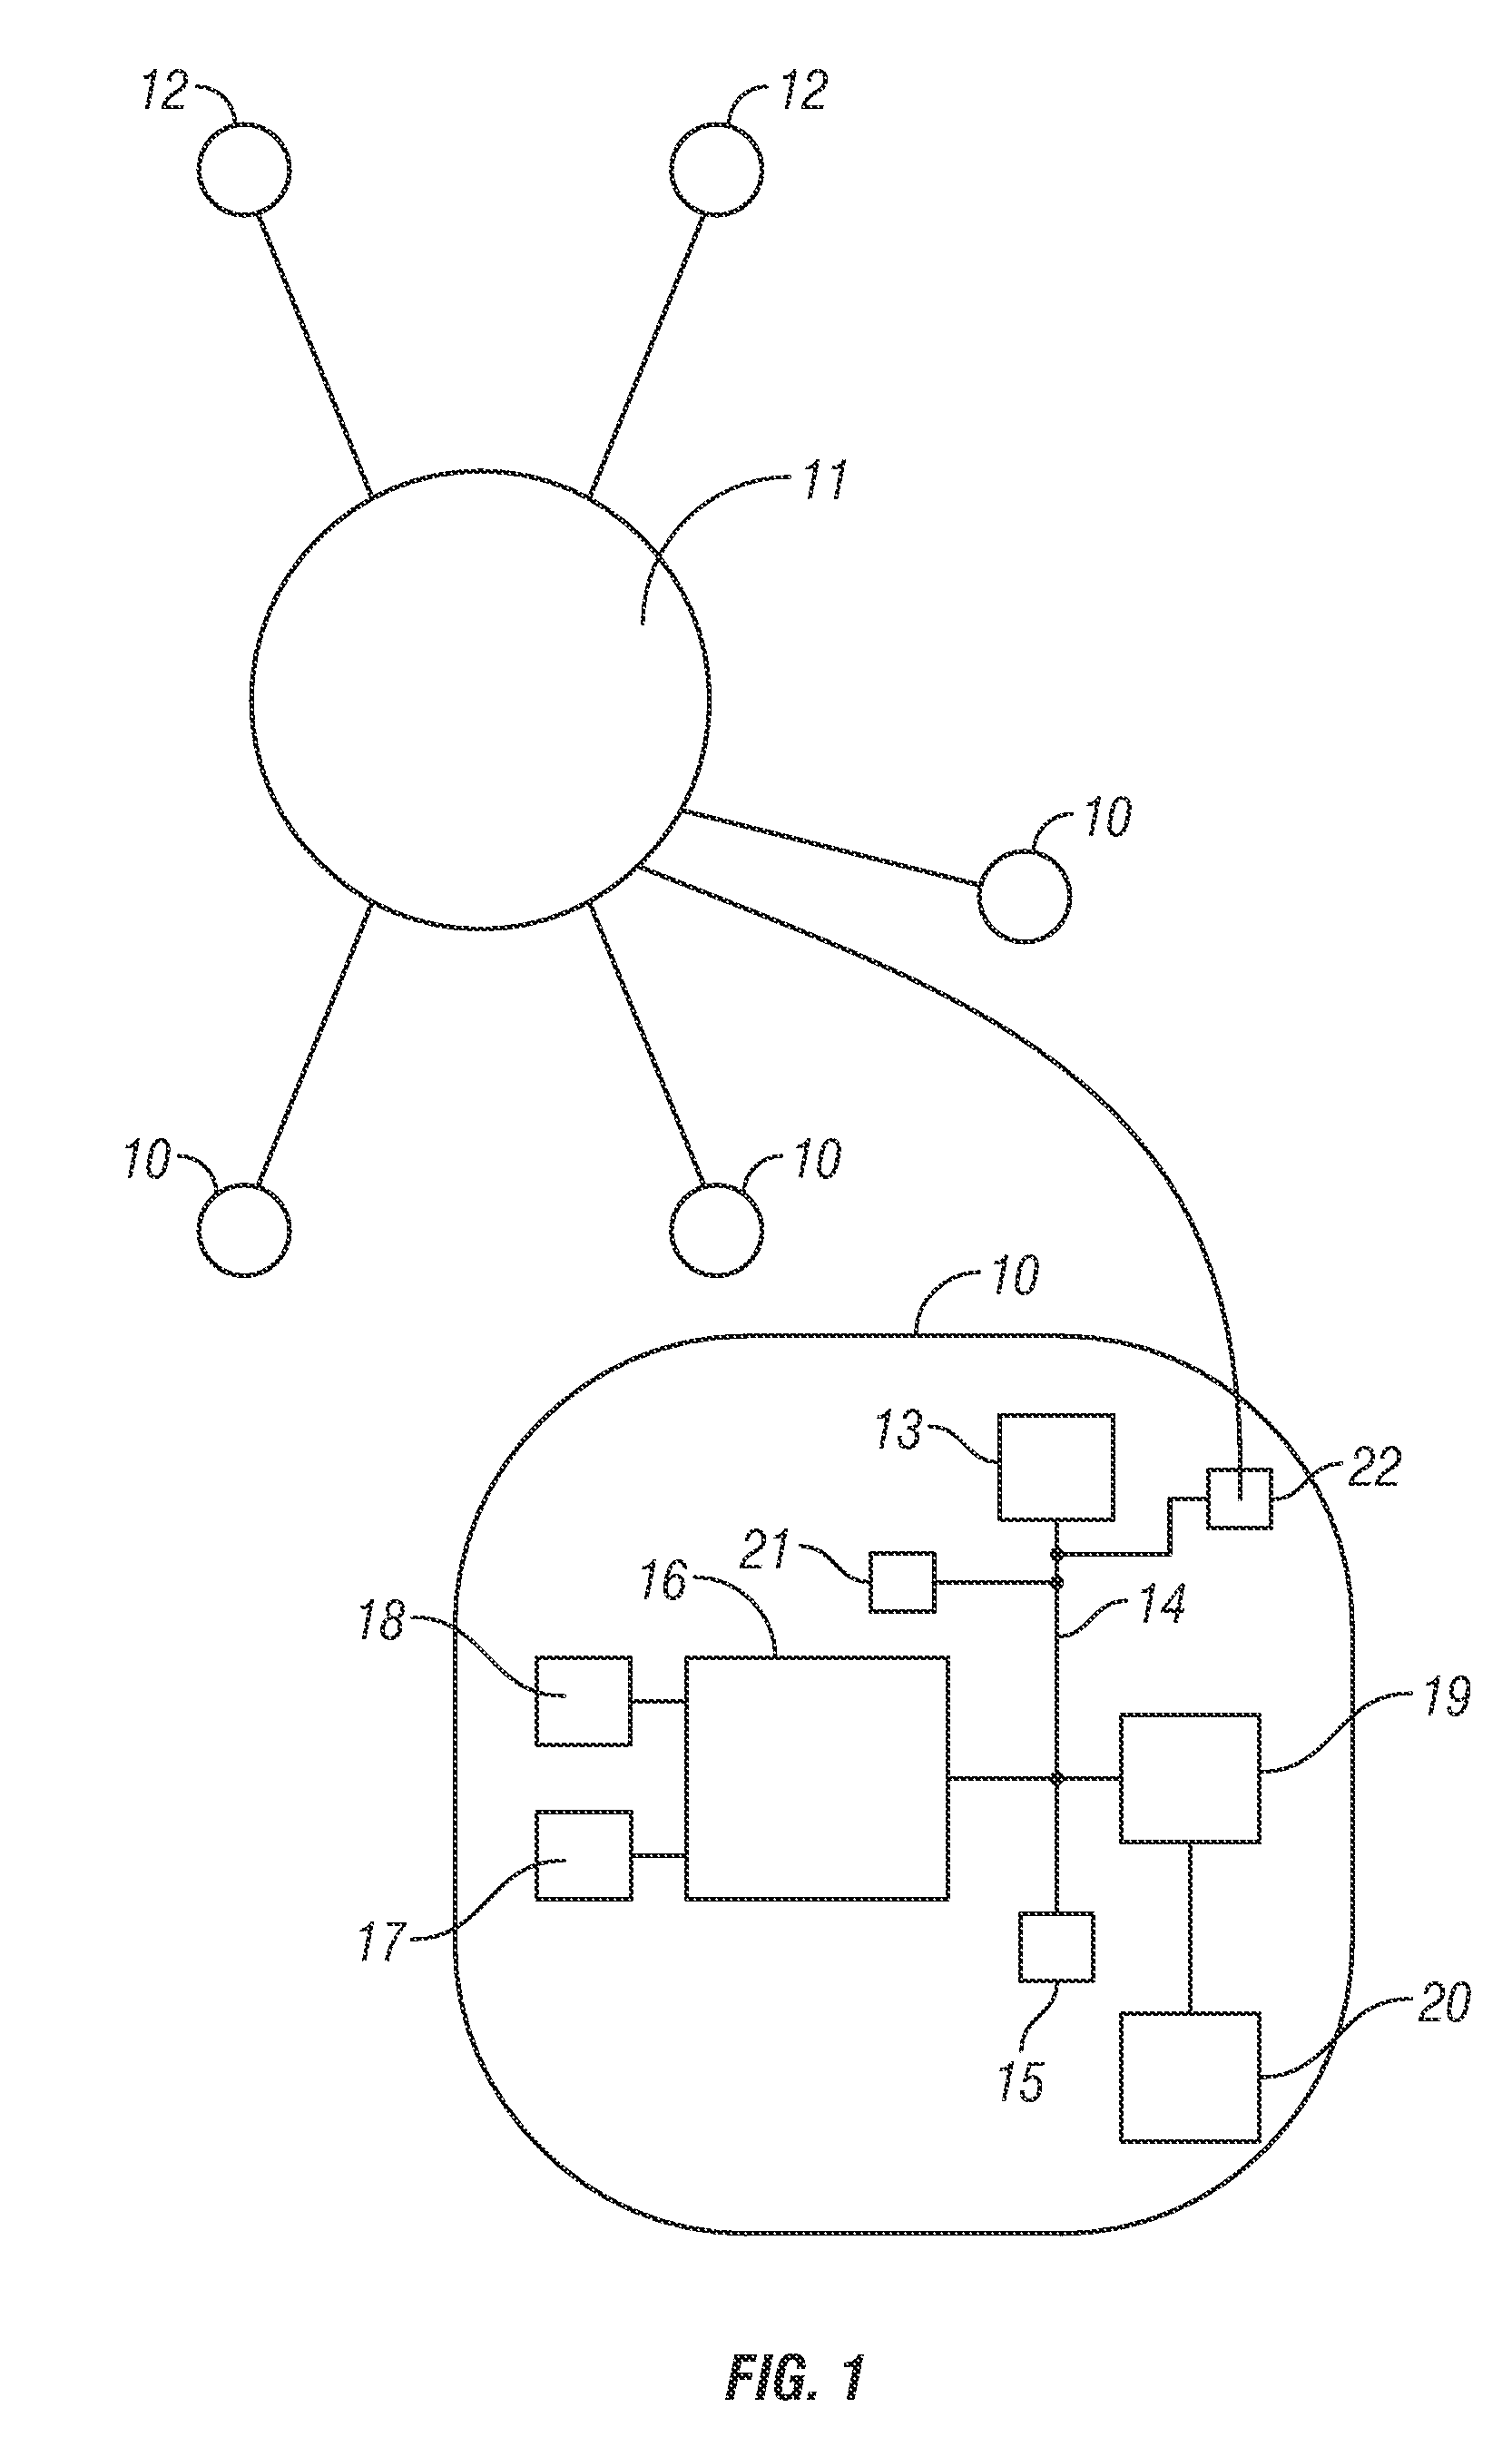 System, Method, Computer Program Product And Article Of Manufacture For Remote Fault Diagnosis And Correction In A Computer System